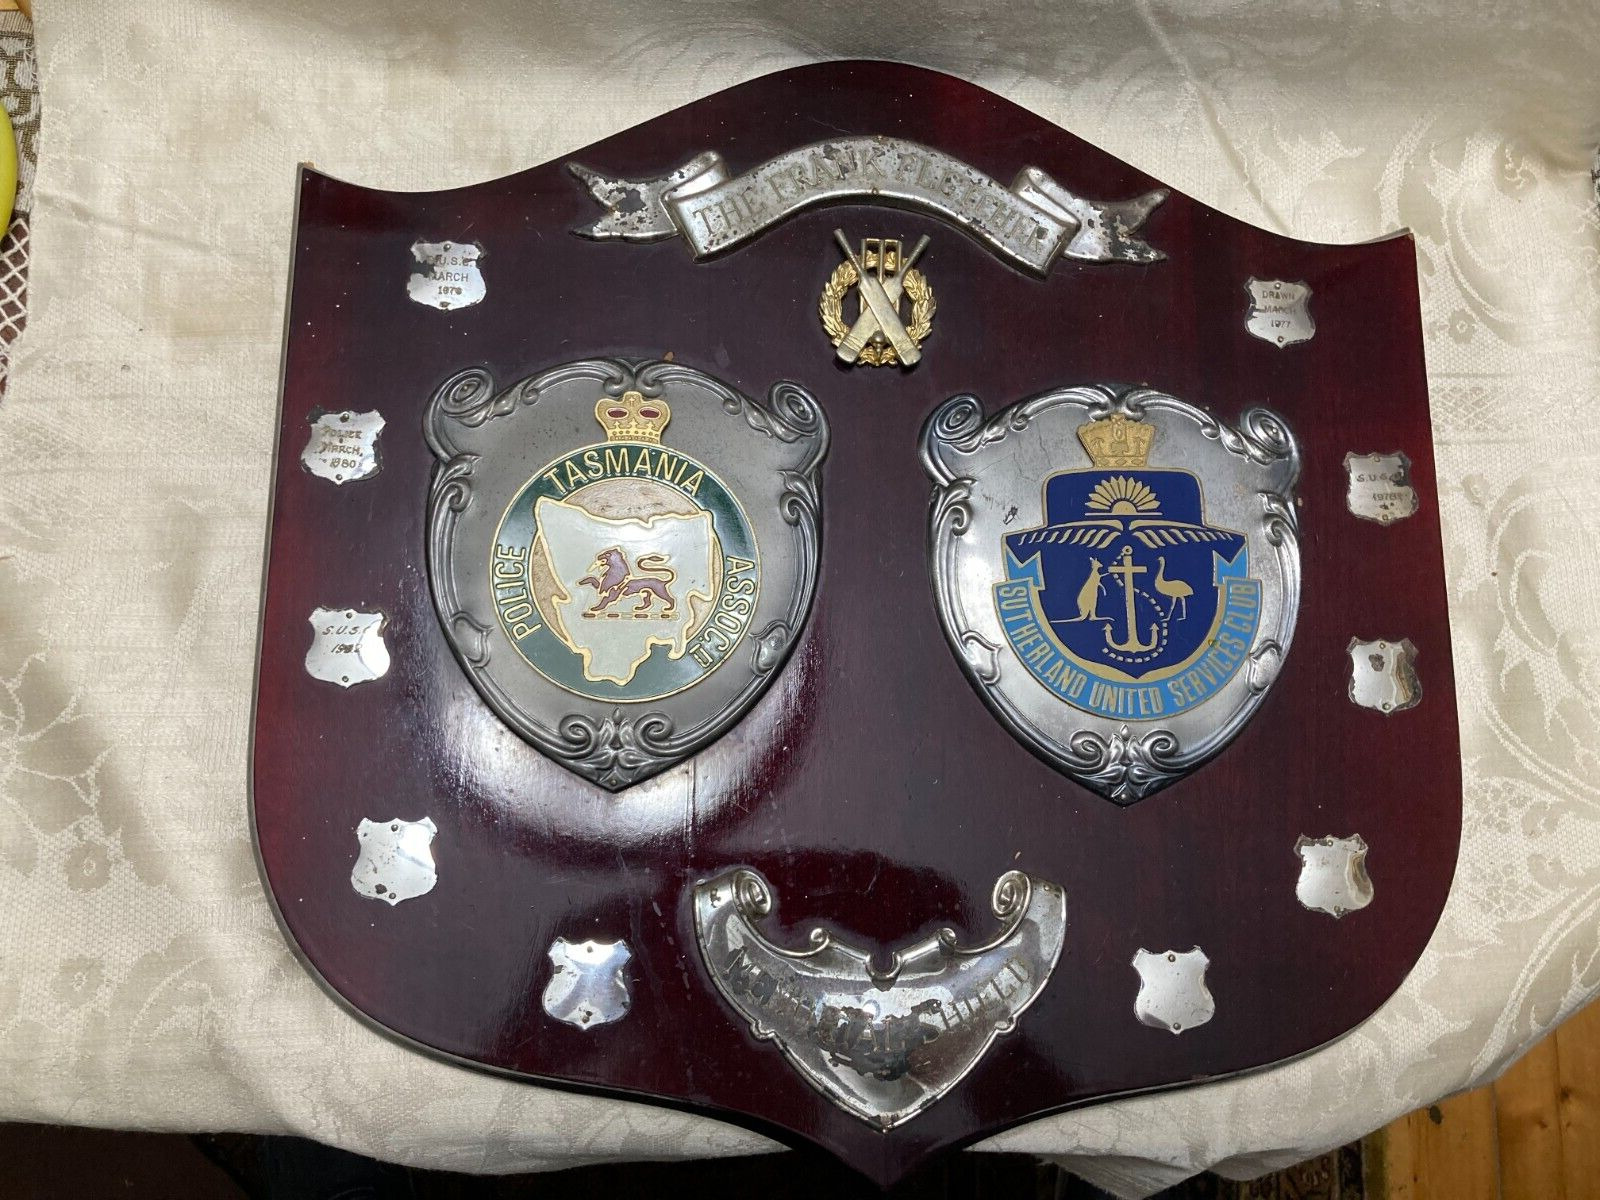 Commemorative Shield for Tasmanian sporting competition 1970's-1980's